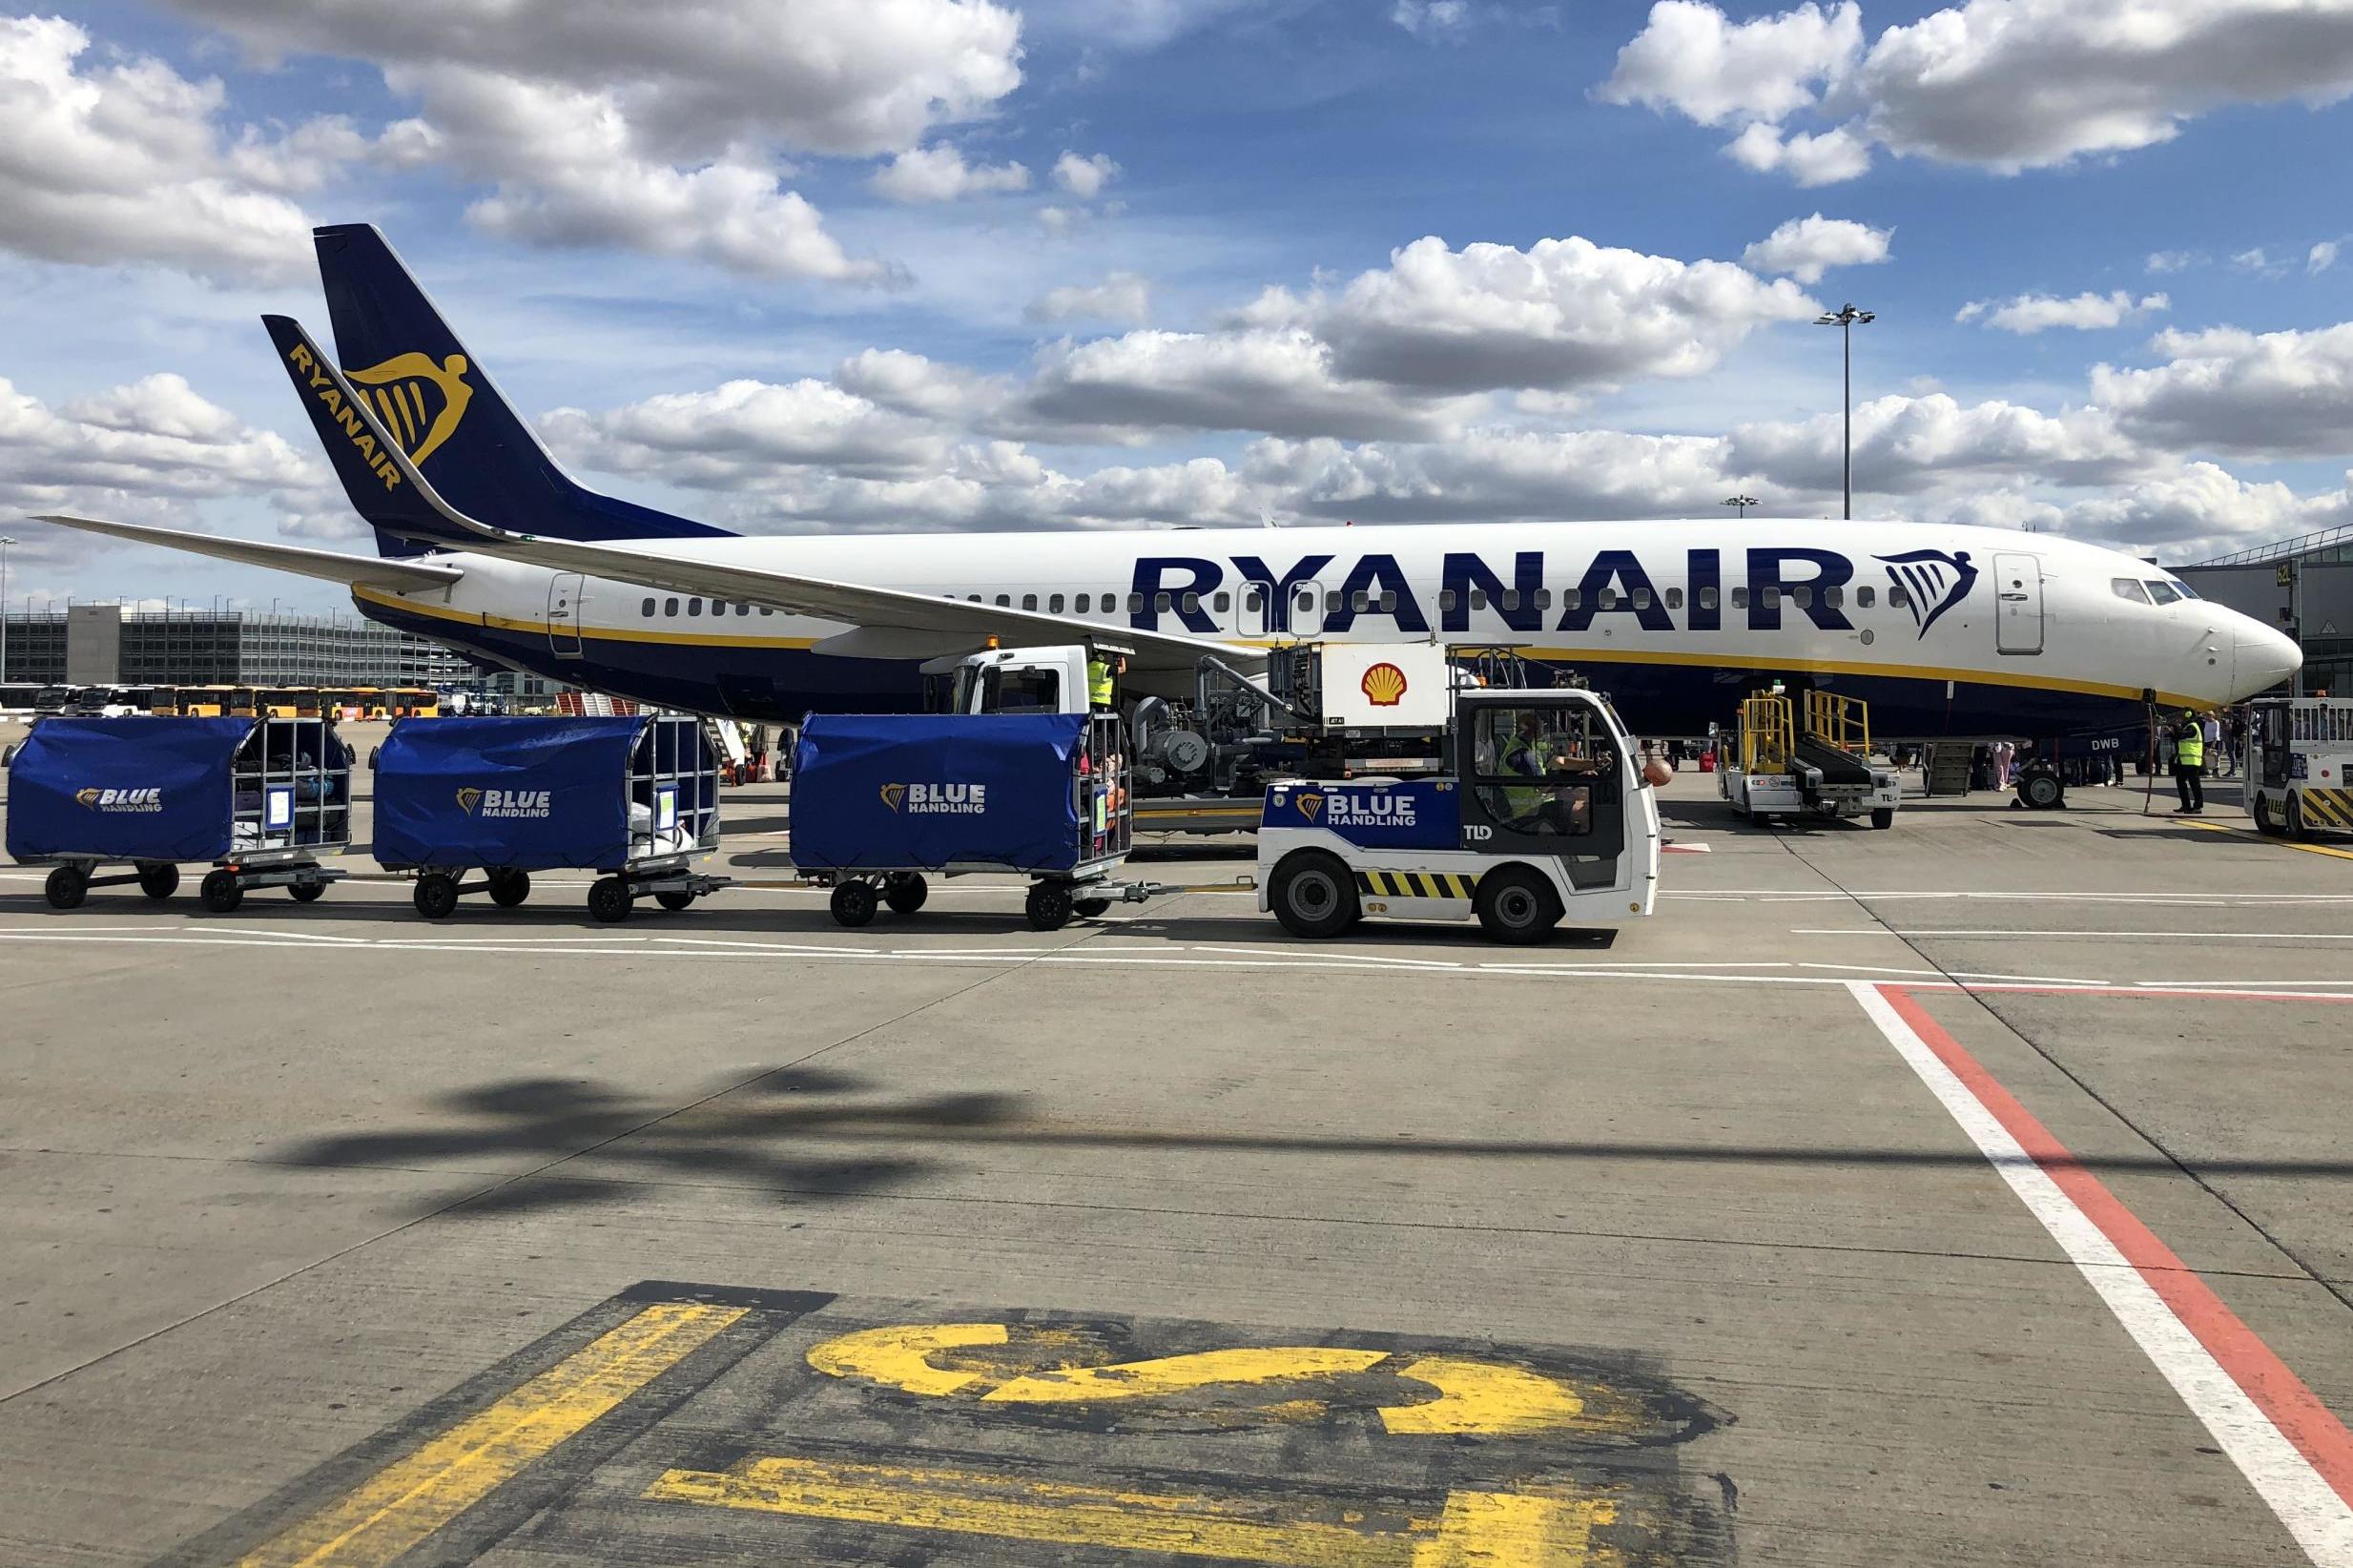 Ground stop: Ryanair is flying only 1 per cent of its planned operations during the coronavirus pandemic